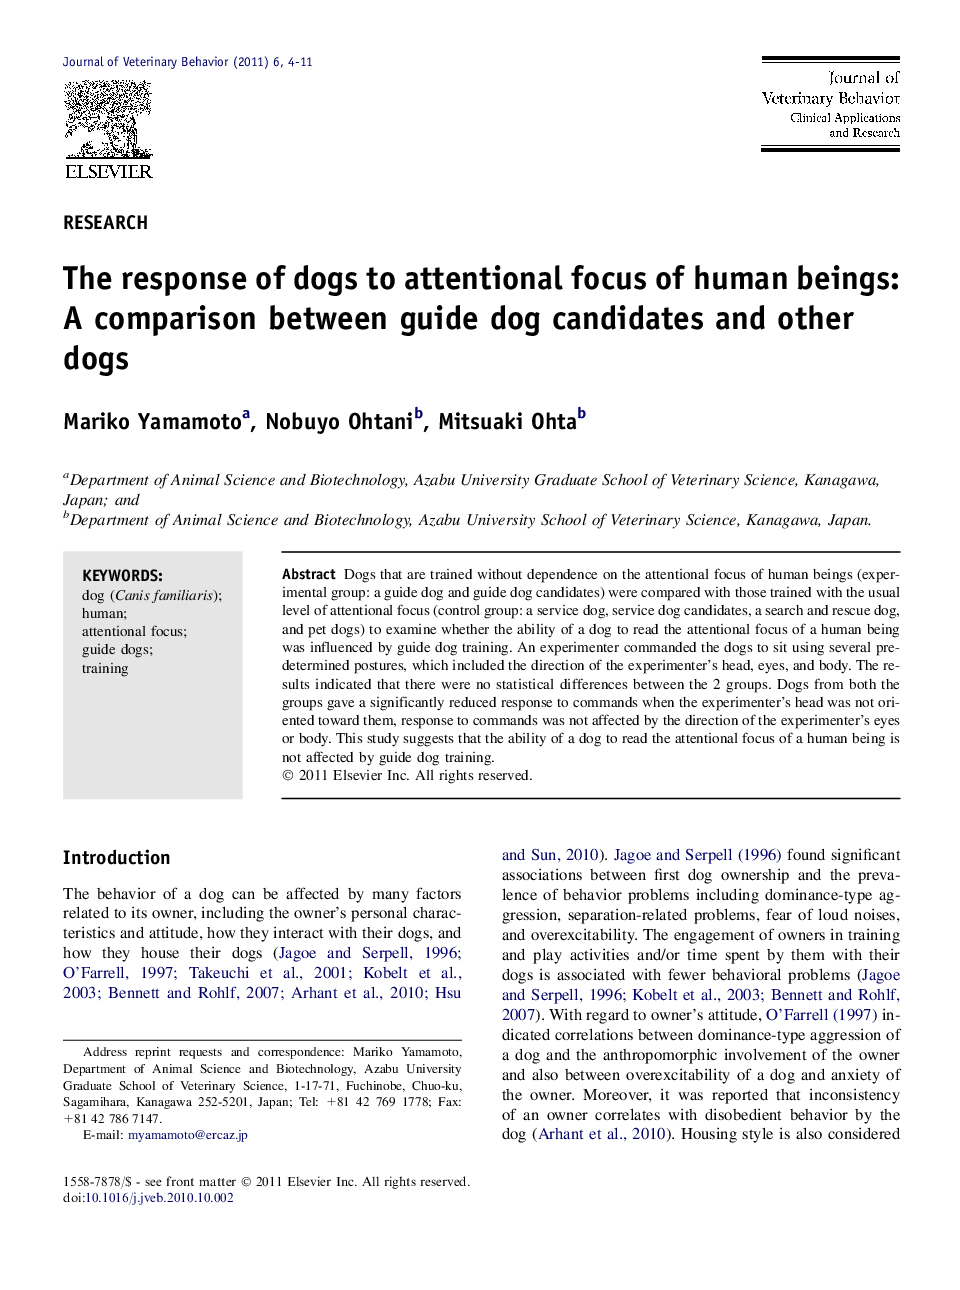 The response of dogs to attentional focus of human beings: A comparison between guide dog candidates and other dogs